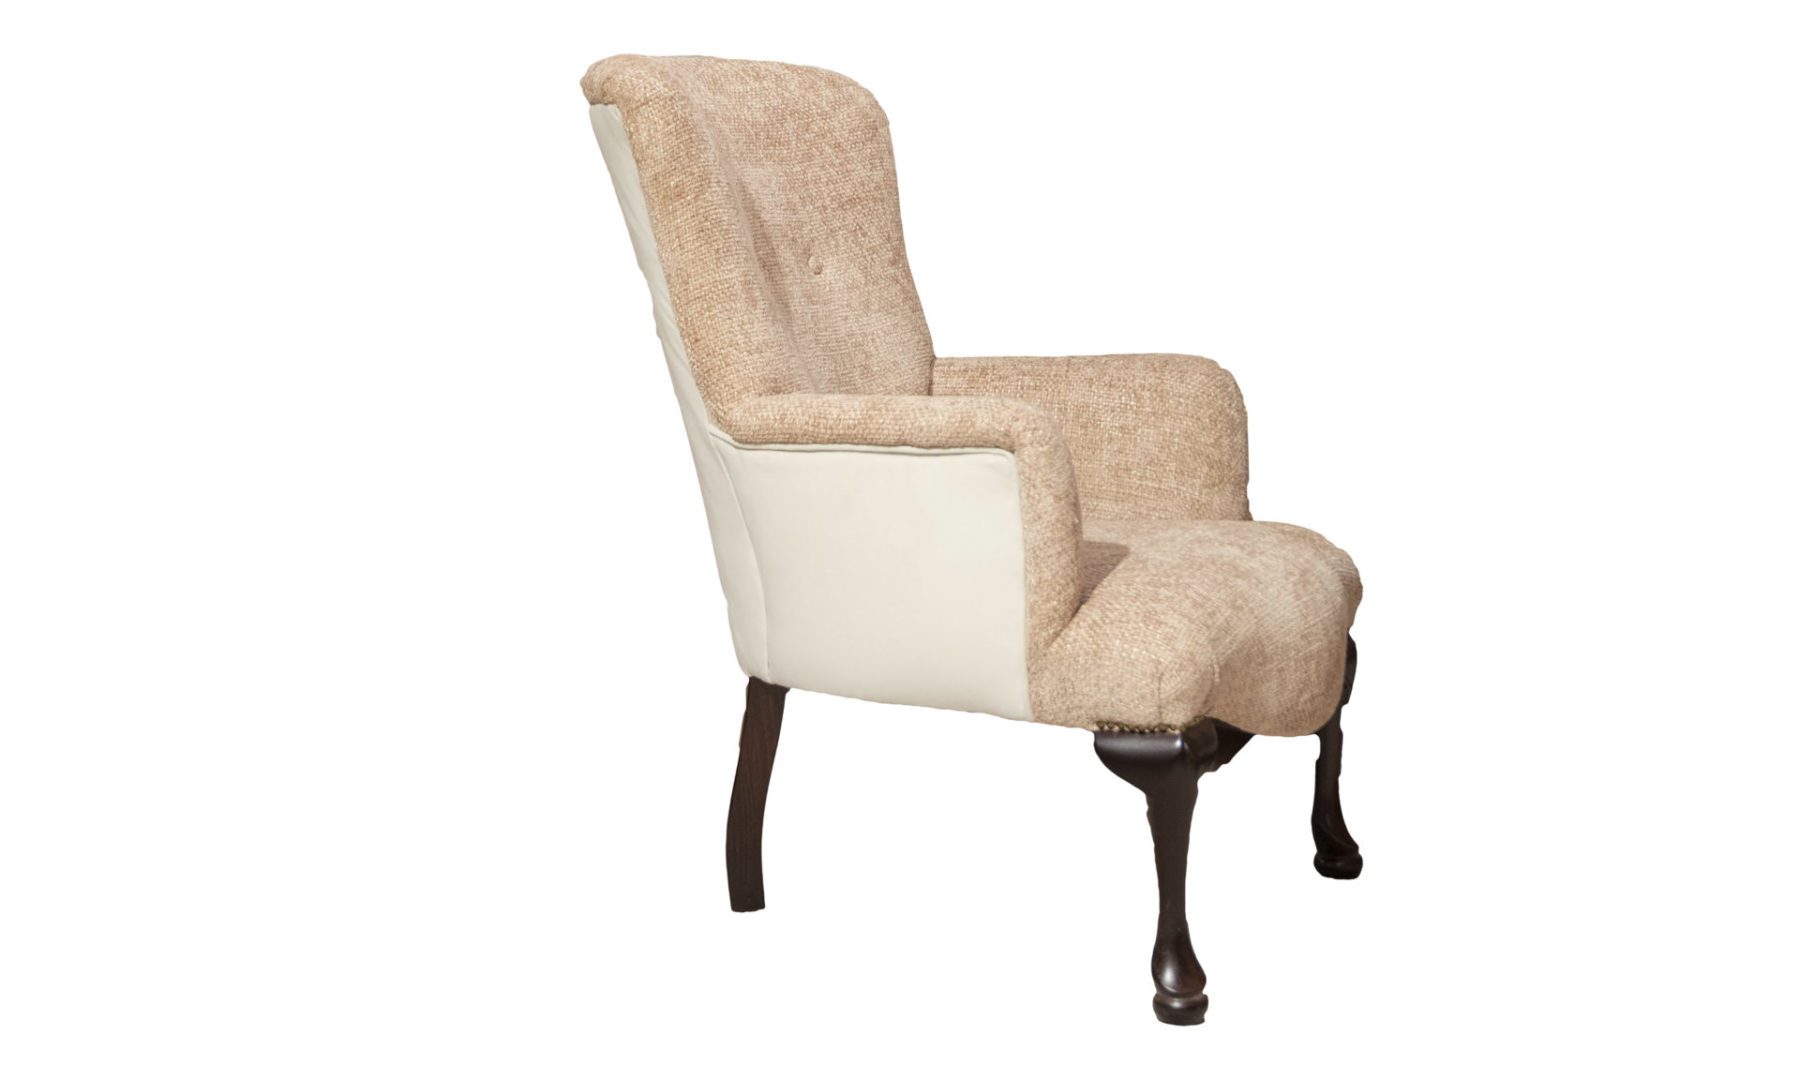 Aisling Chair in Schino Blush, Gold Collection Fabric - Back panel in Plush Bone